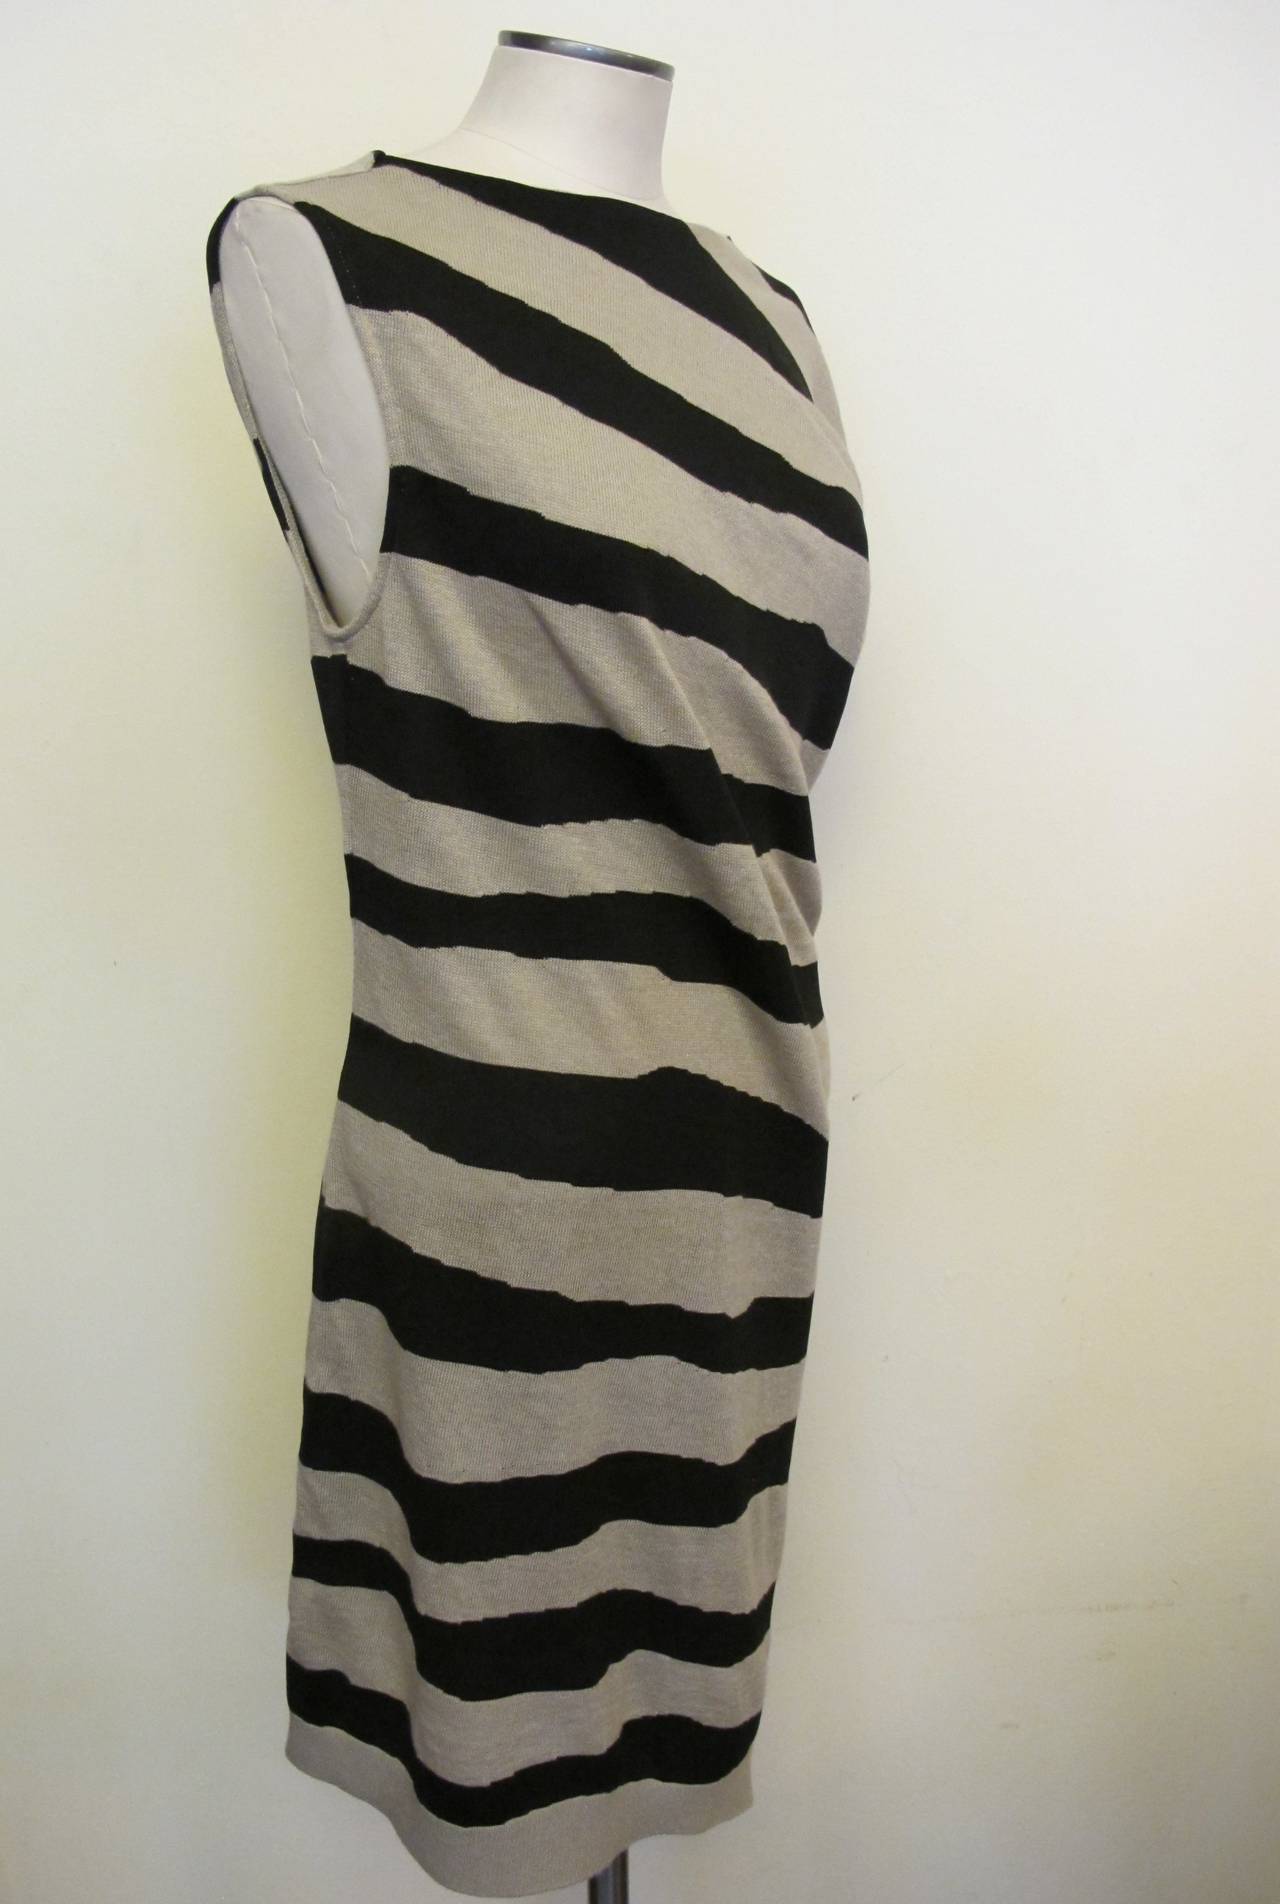 Balenciaga Zebra striped angular dress is new with Barney's tag. It has three snap buttons on the bottom left side of the garment.